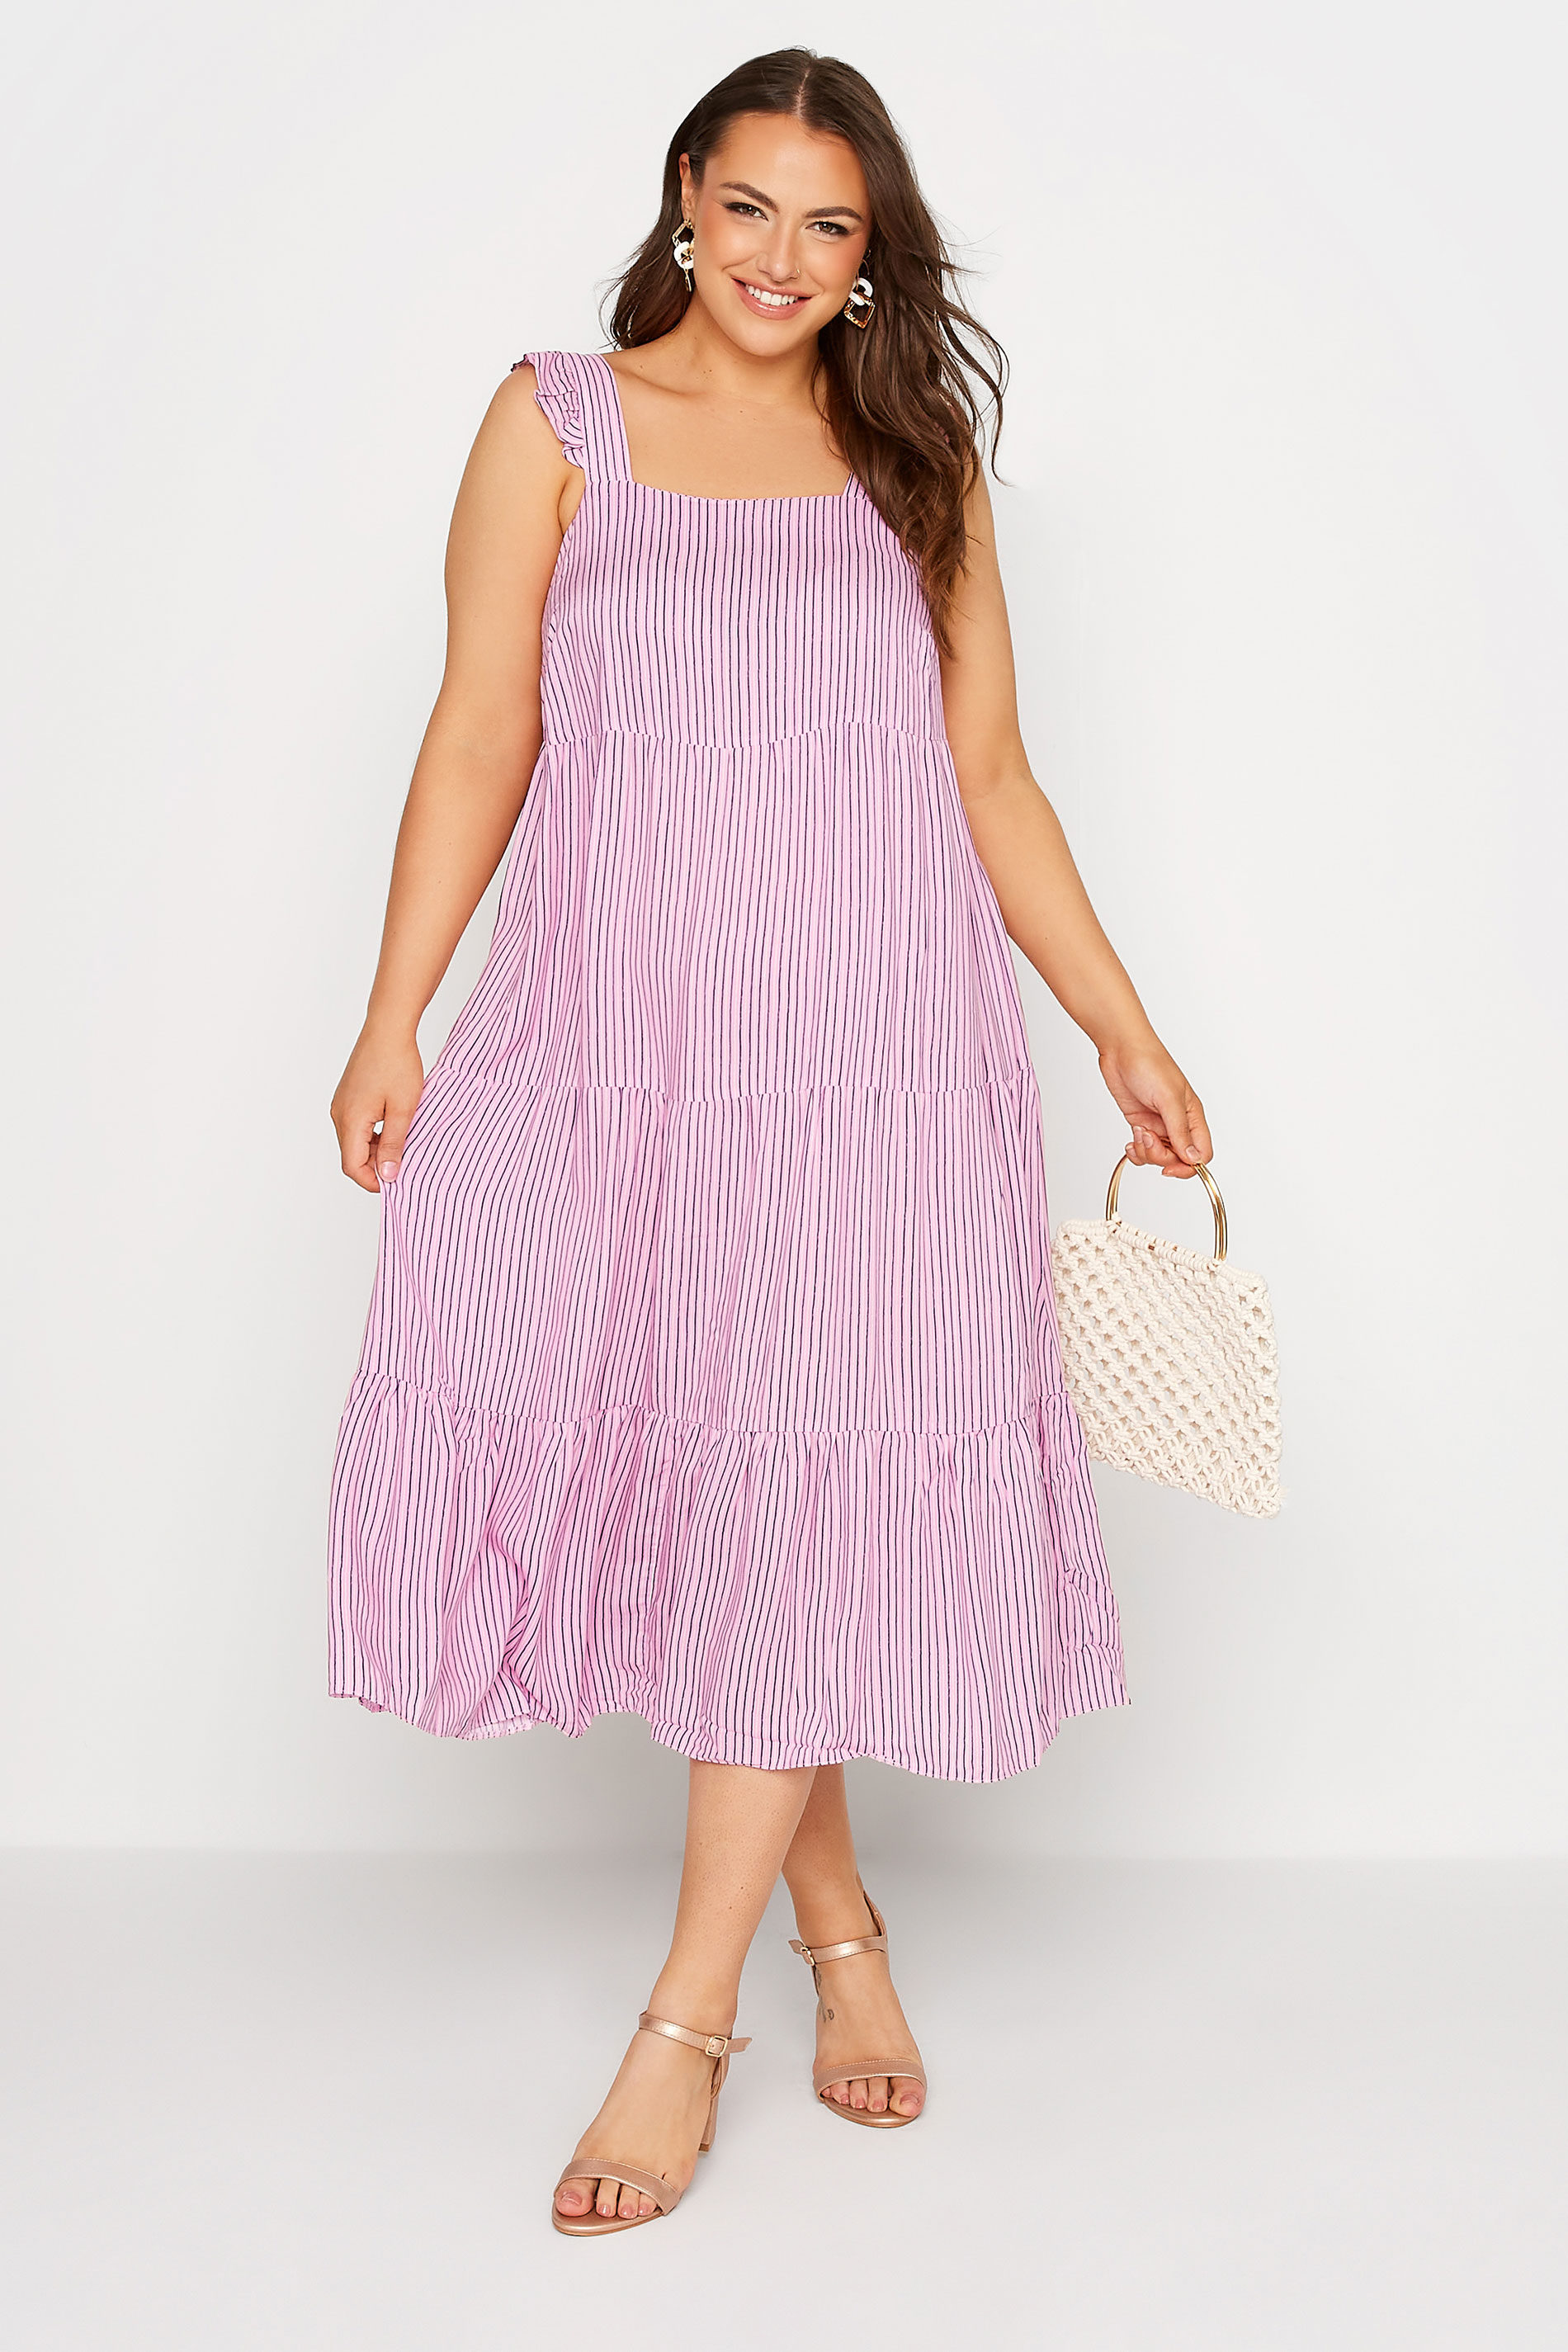 Robes Grande Taille Grande taille  Robes Longues | YOURS LONDON - Robe Rose Midi Volanté à Rayures - HX63179